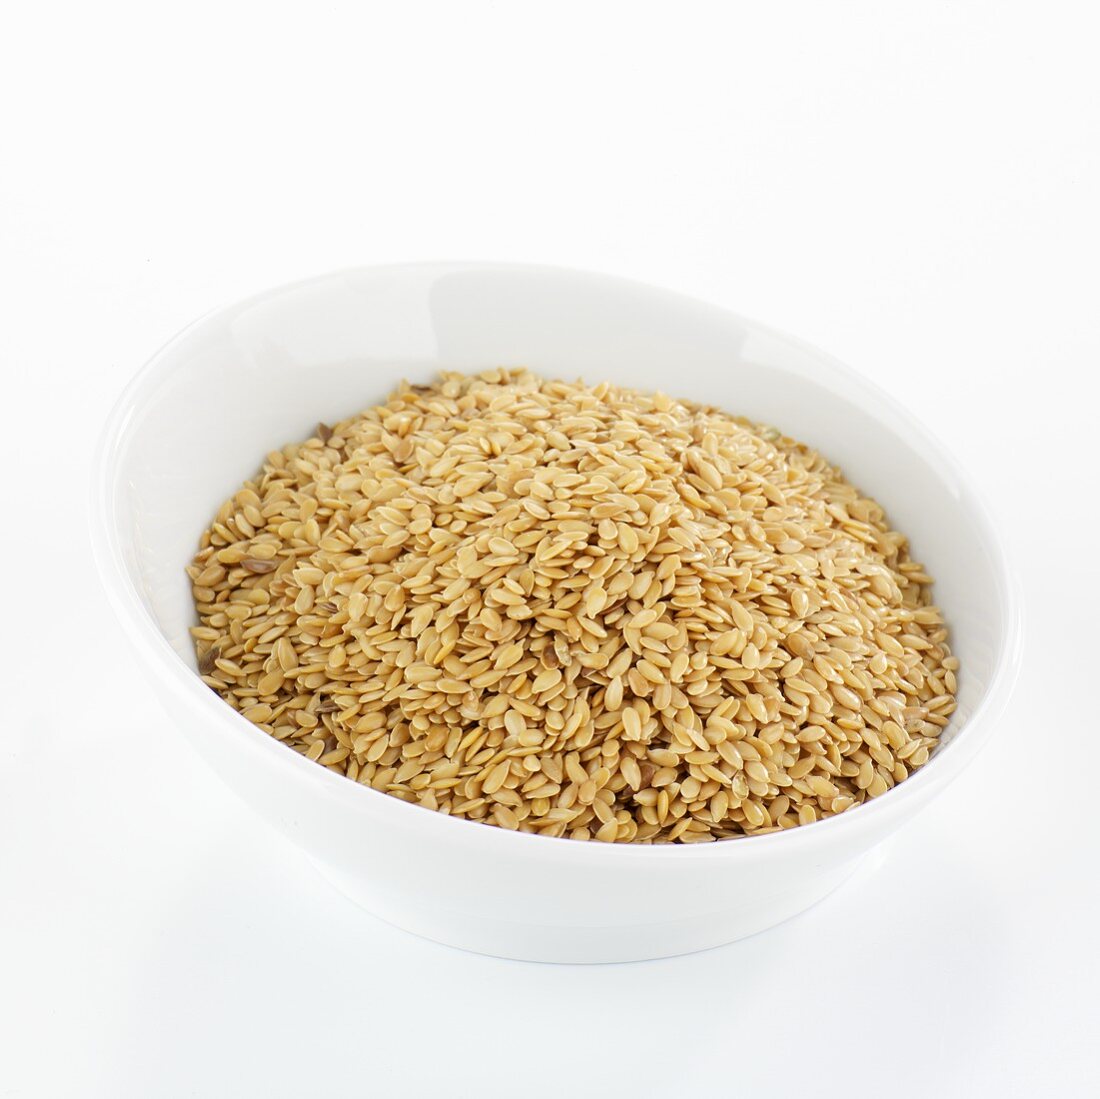 Linseed in white bowl